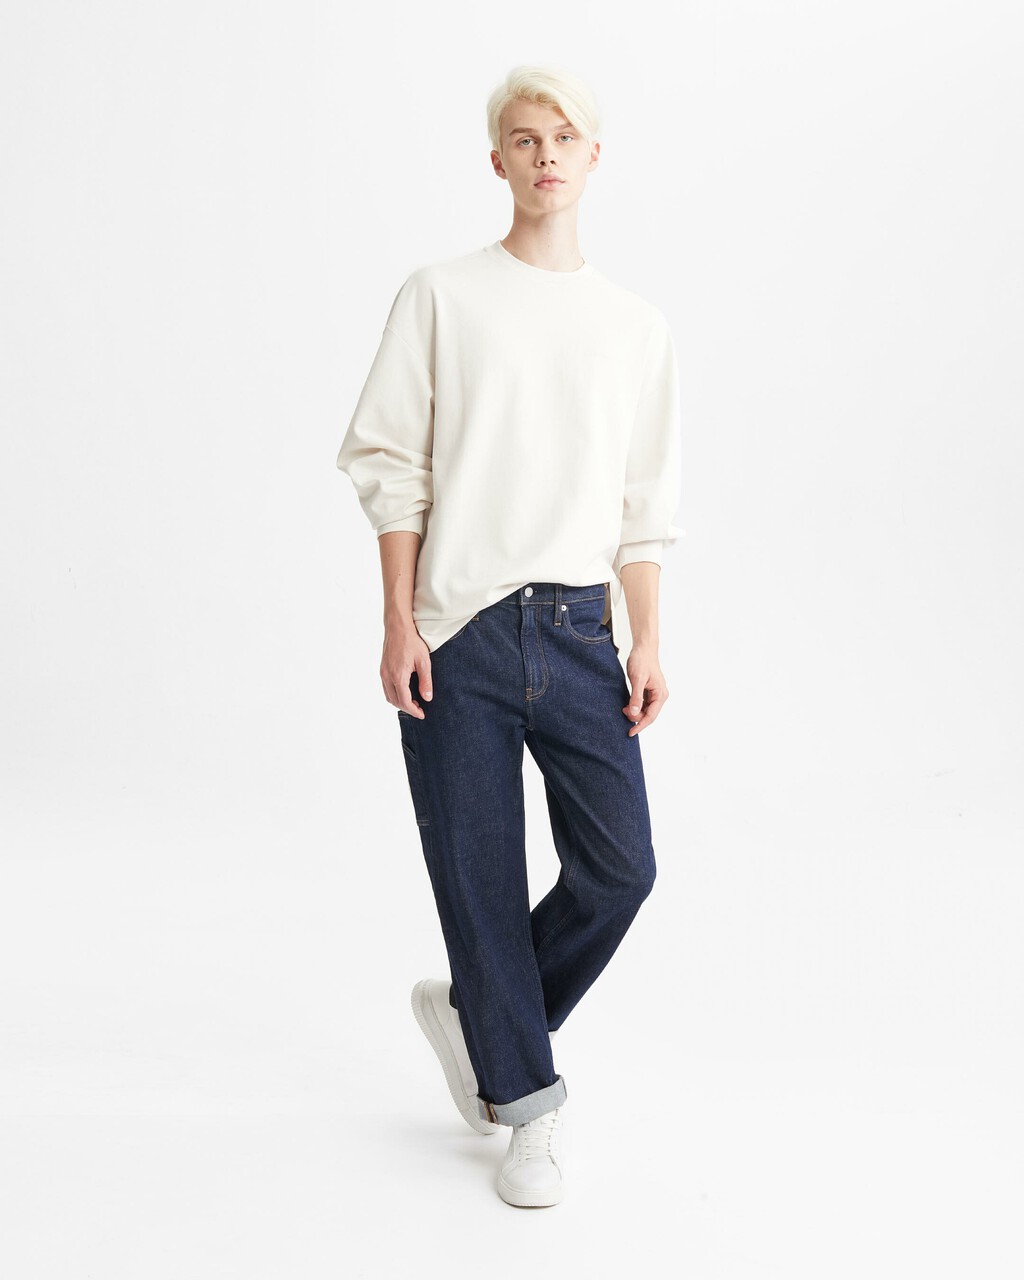 CK KHAKIS ARTICULATED SPACER RELAXED SWEATSHIRT, Chalk, hi-res